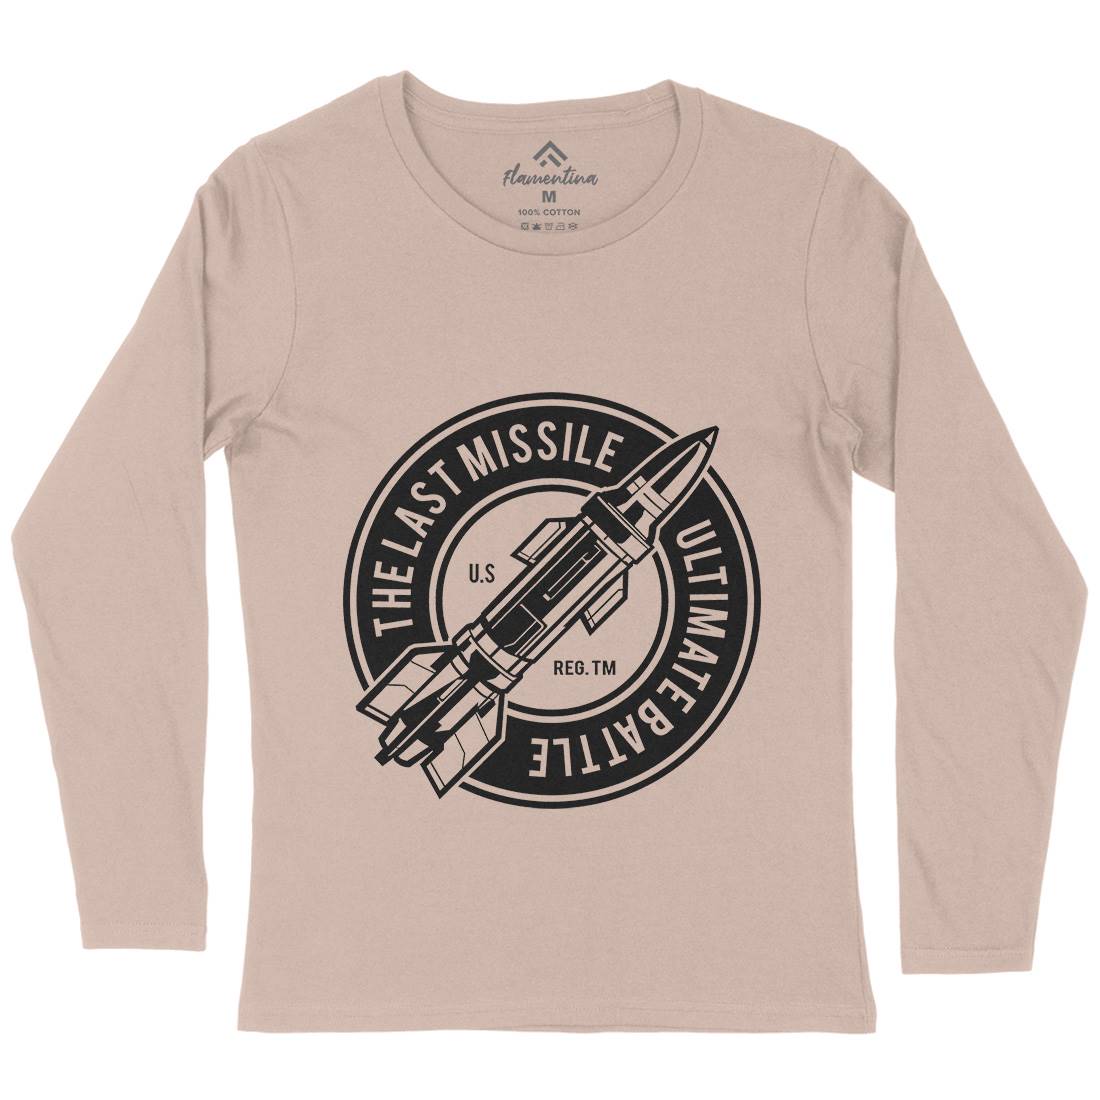 Last Missile Womens Long Sleeve T-Shirt Army A175